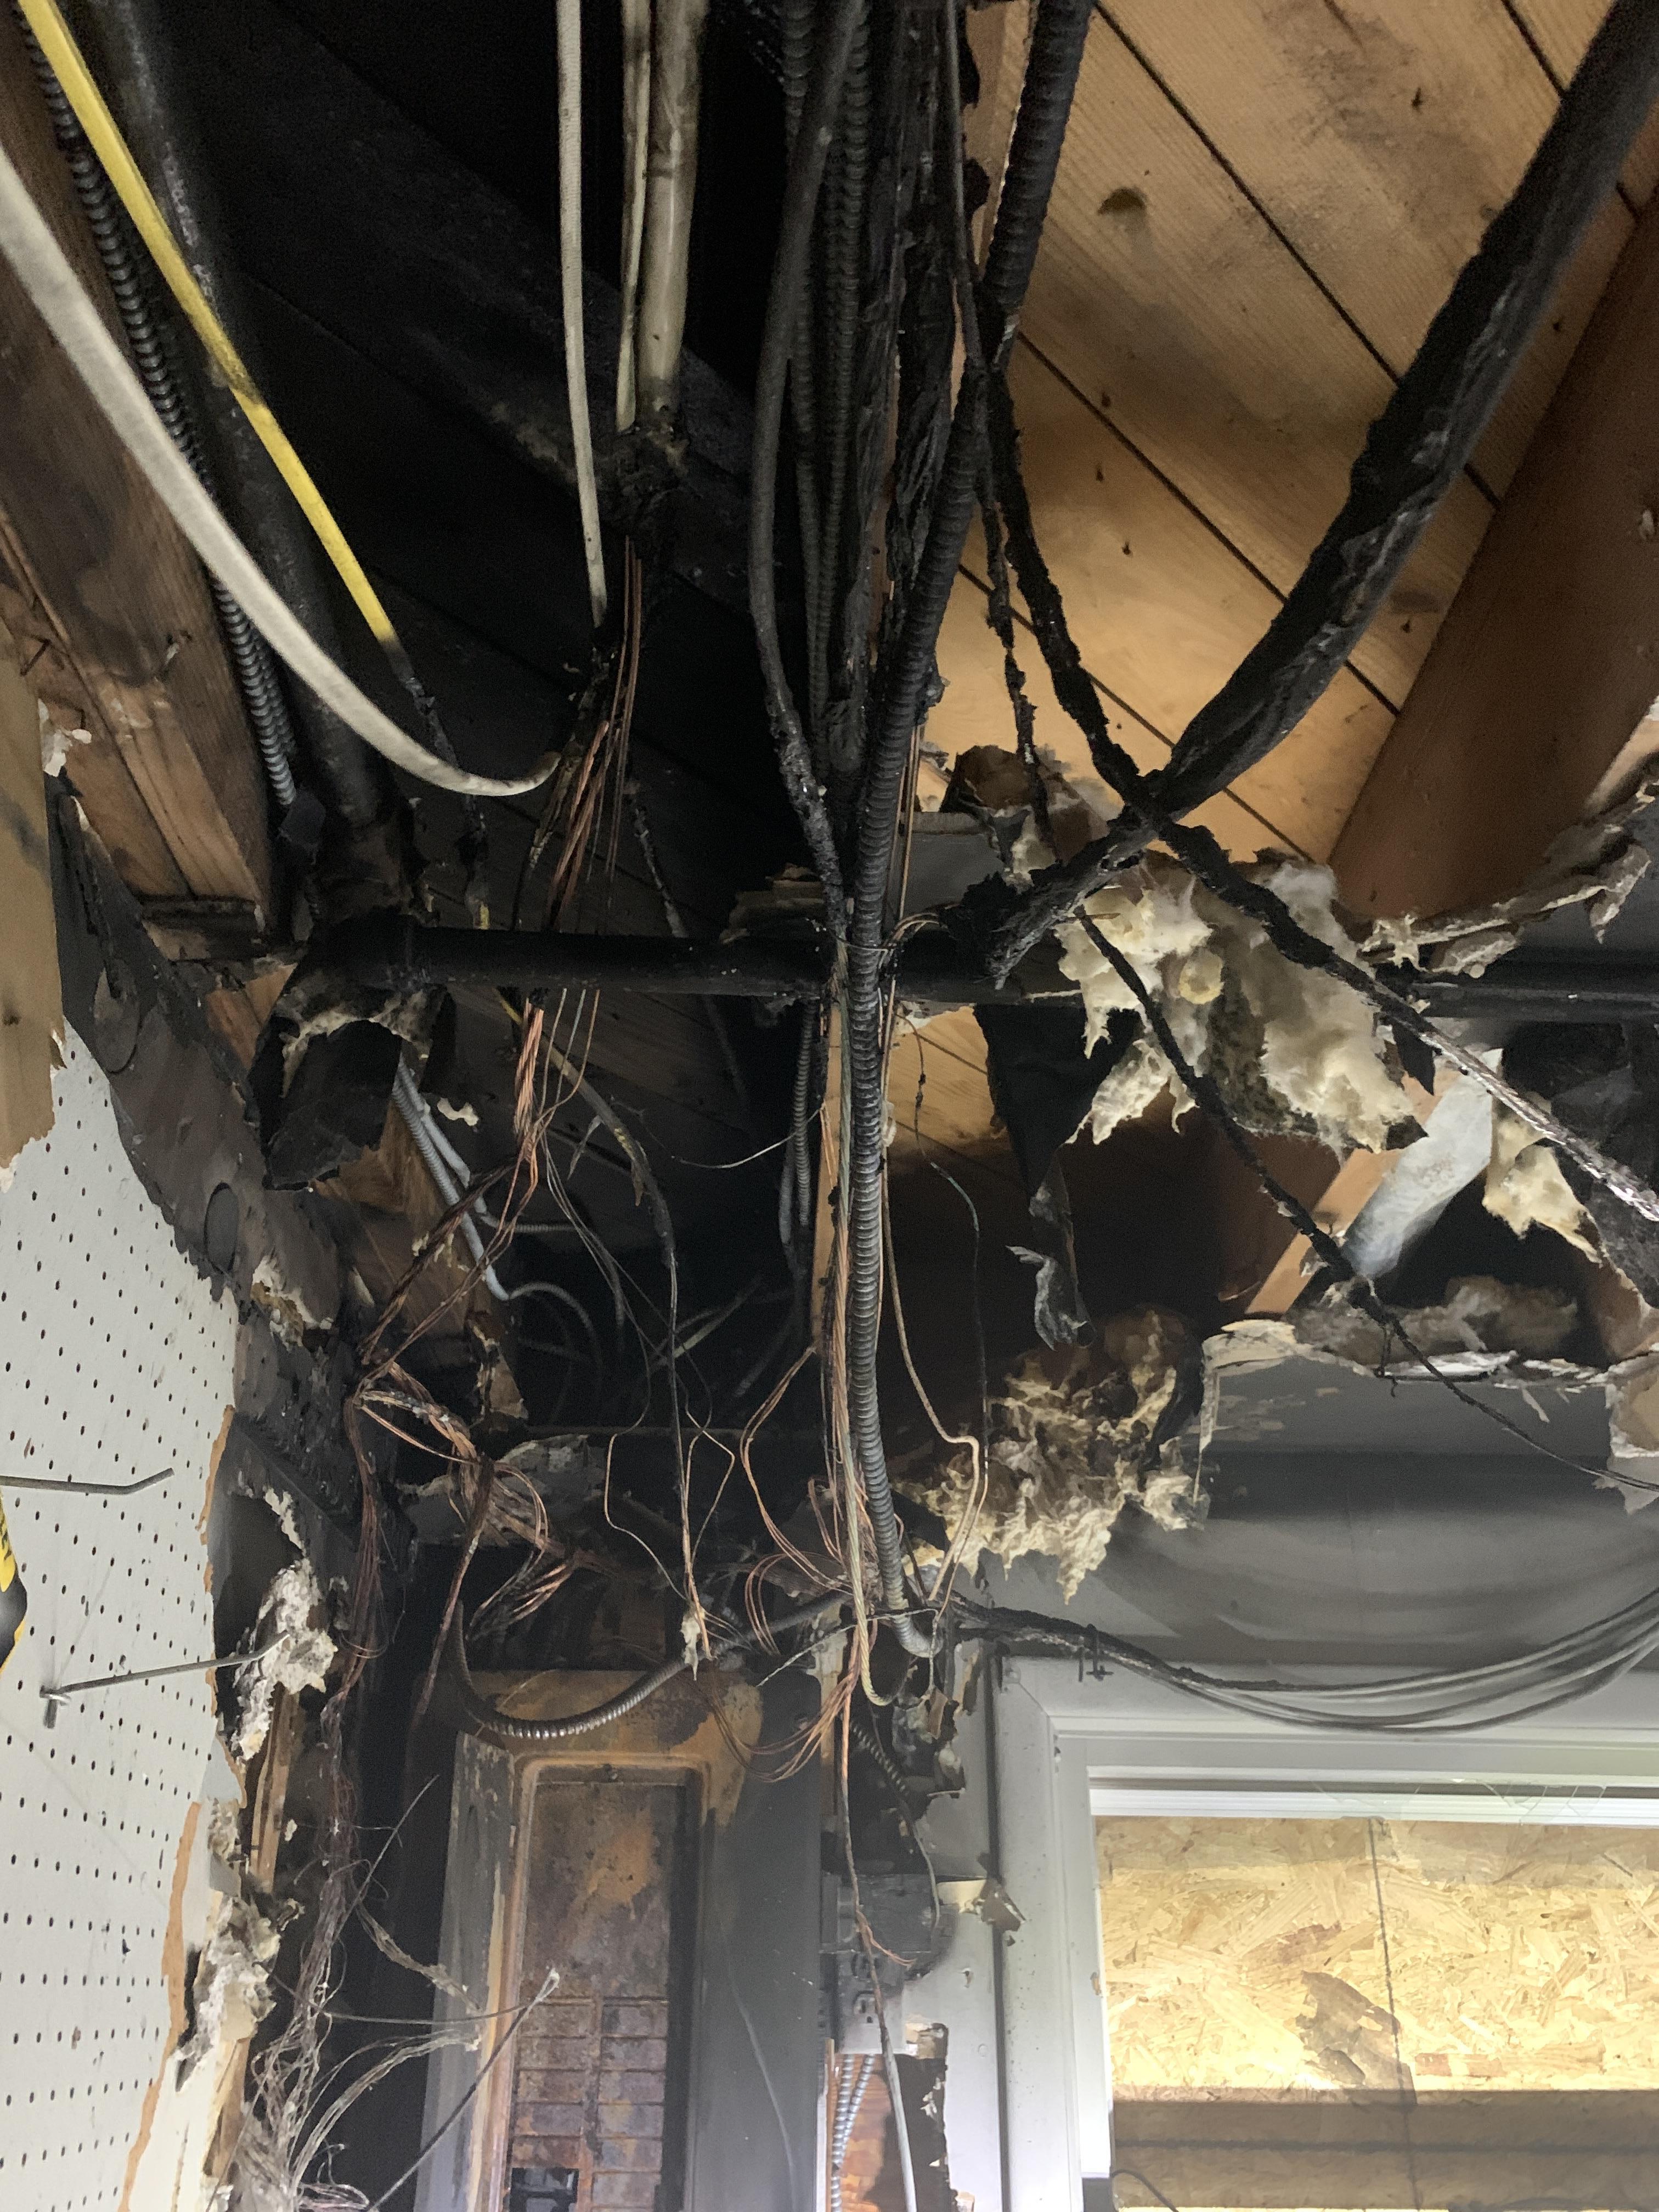 Ceiling and Electrical Wiring Damage from Fire